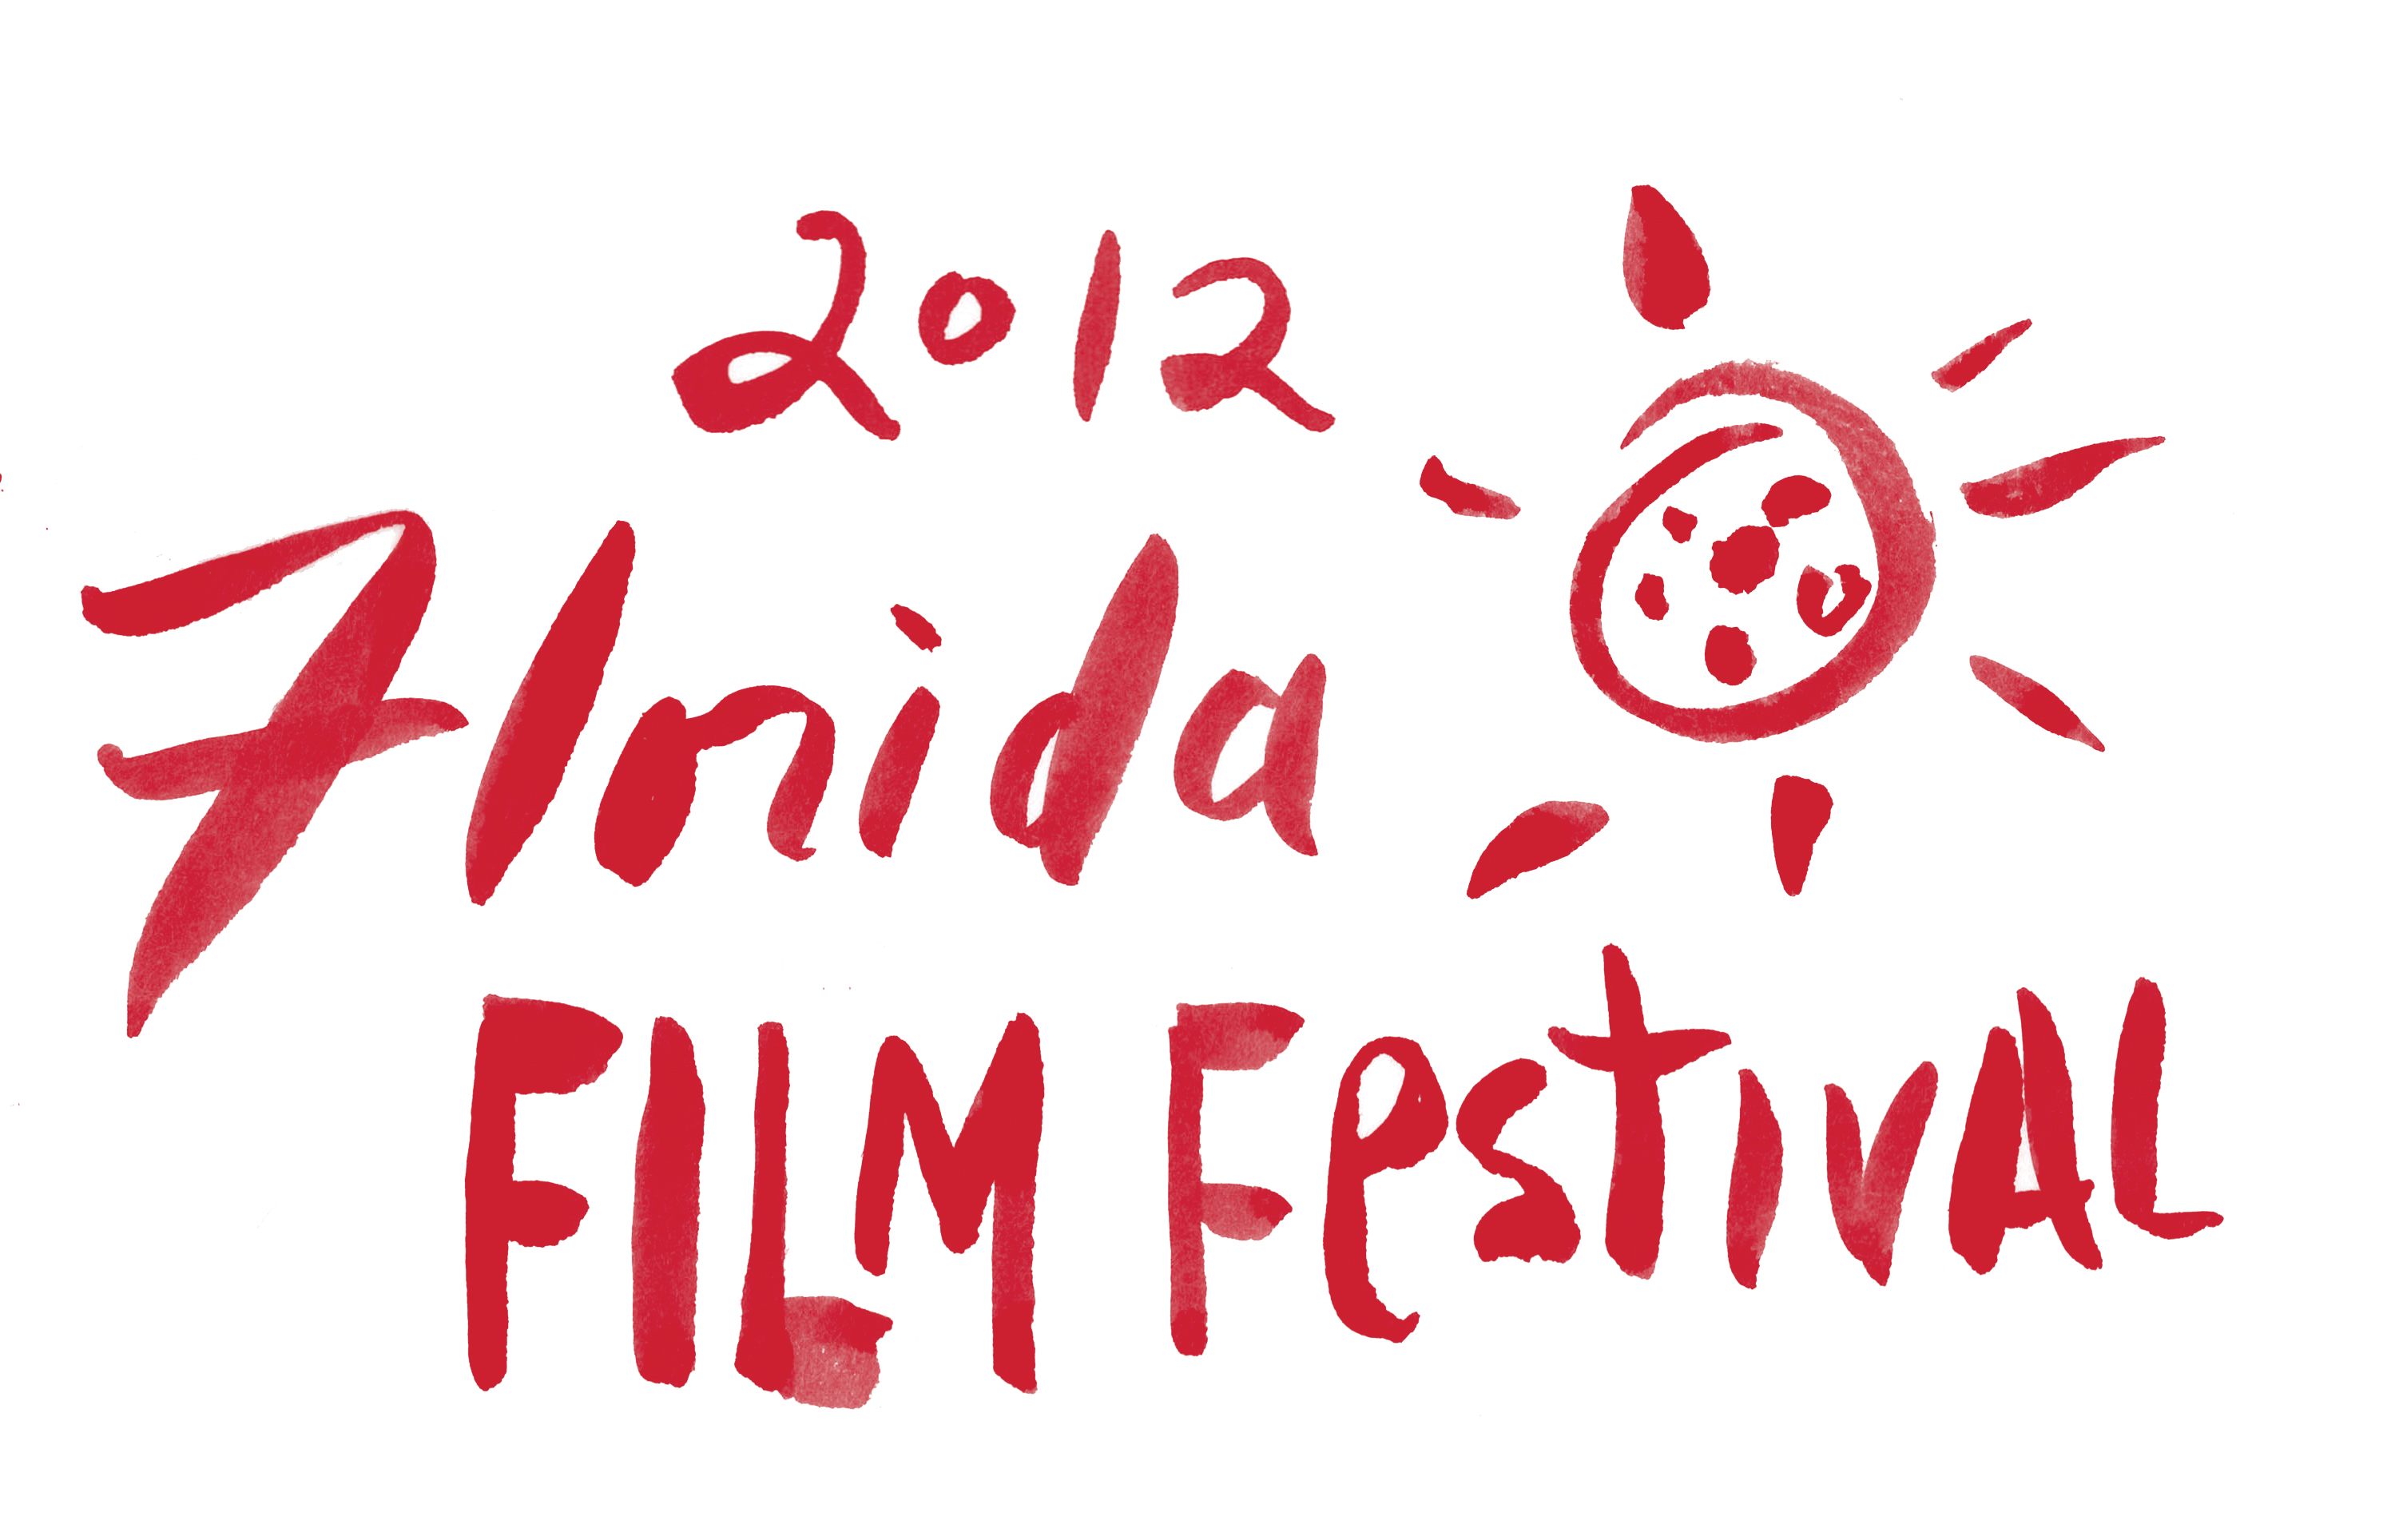 Florida Film Festival Giveaway – Two Tickets to see a film